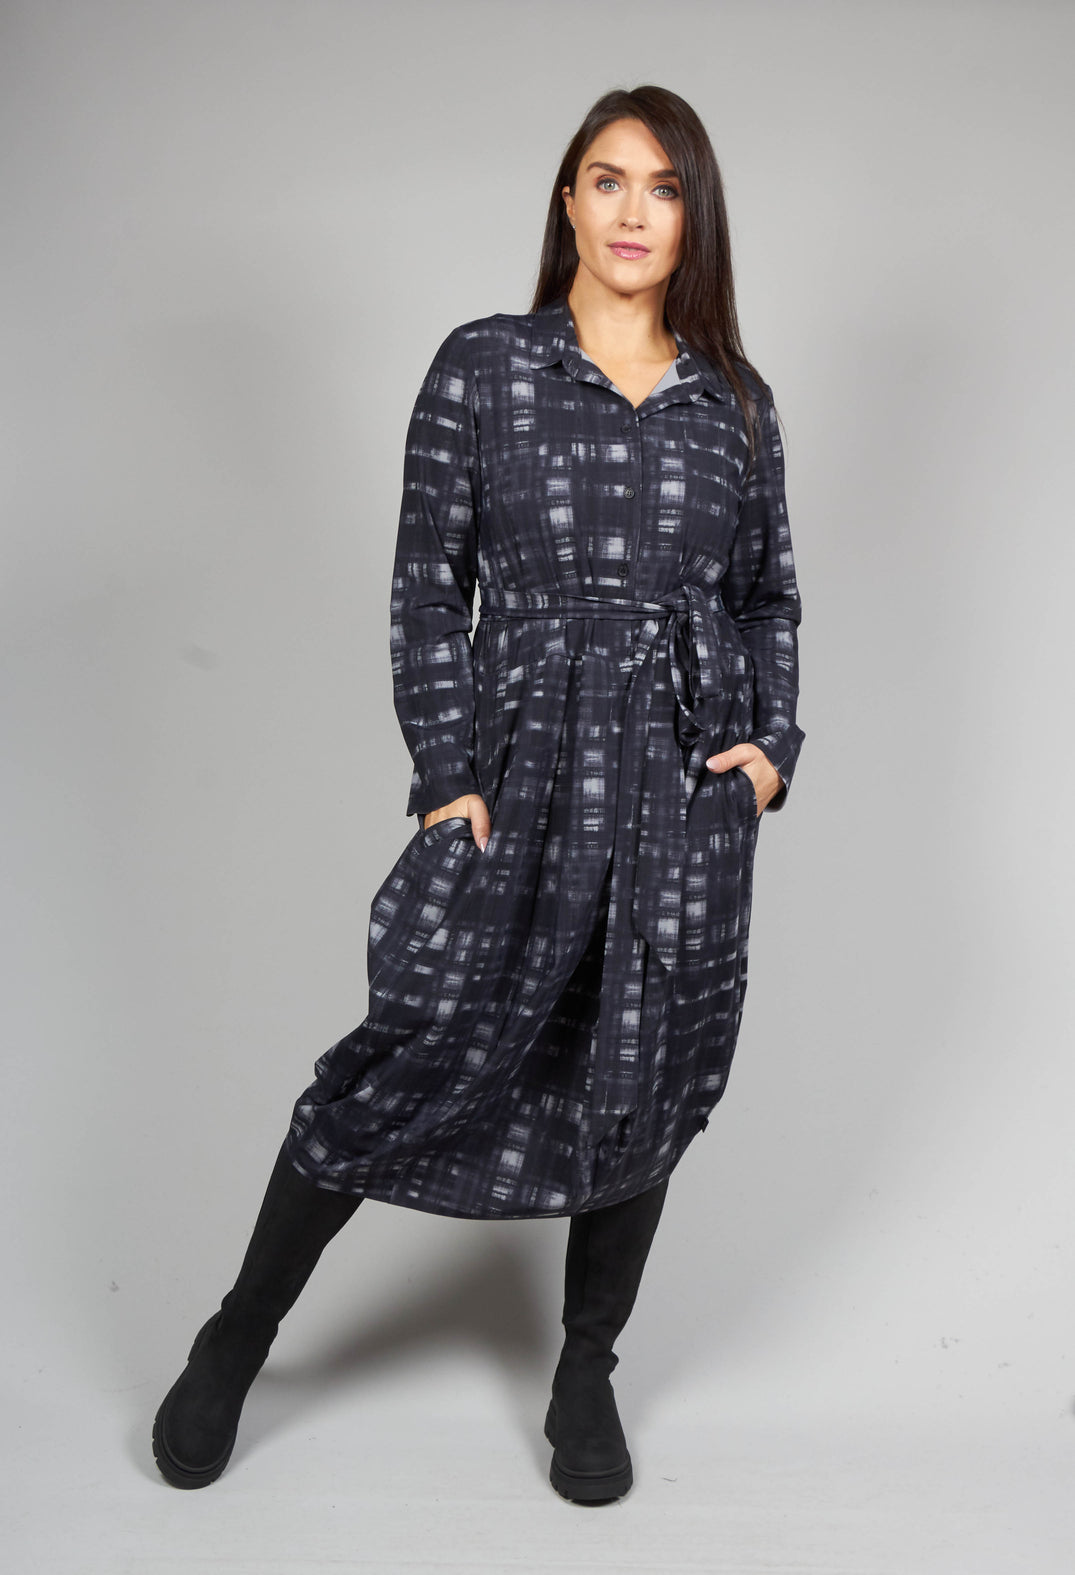 Jusan Dress in Black and Grey